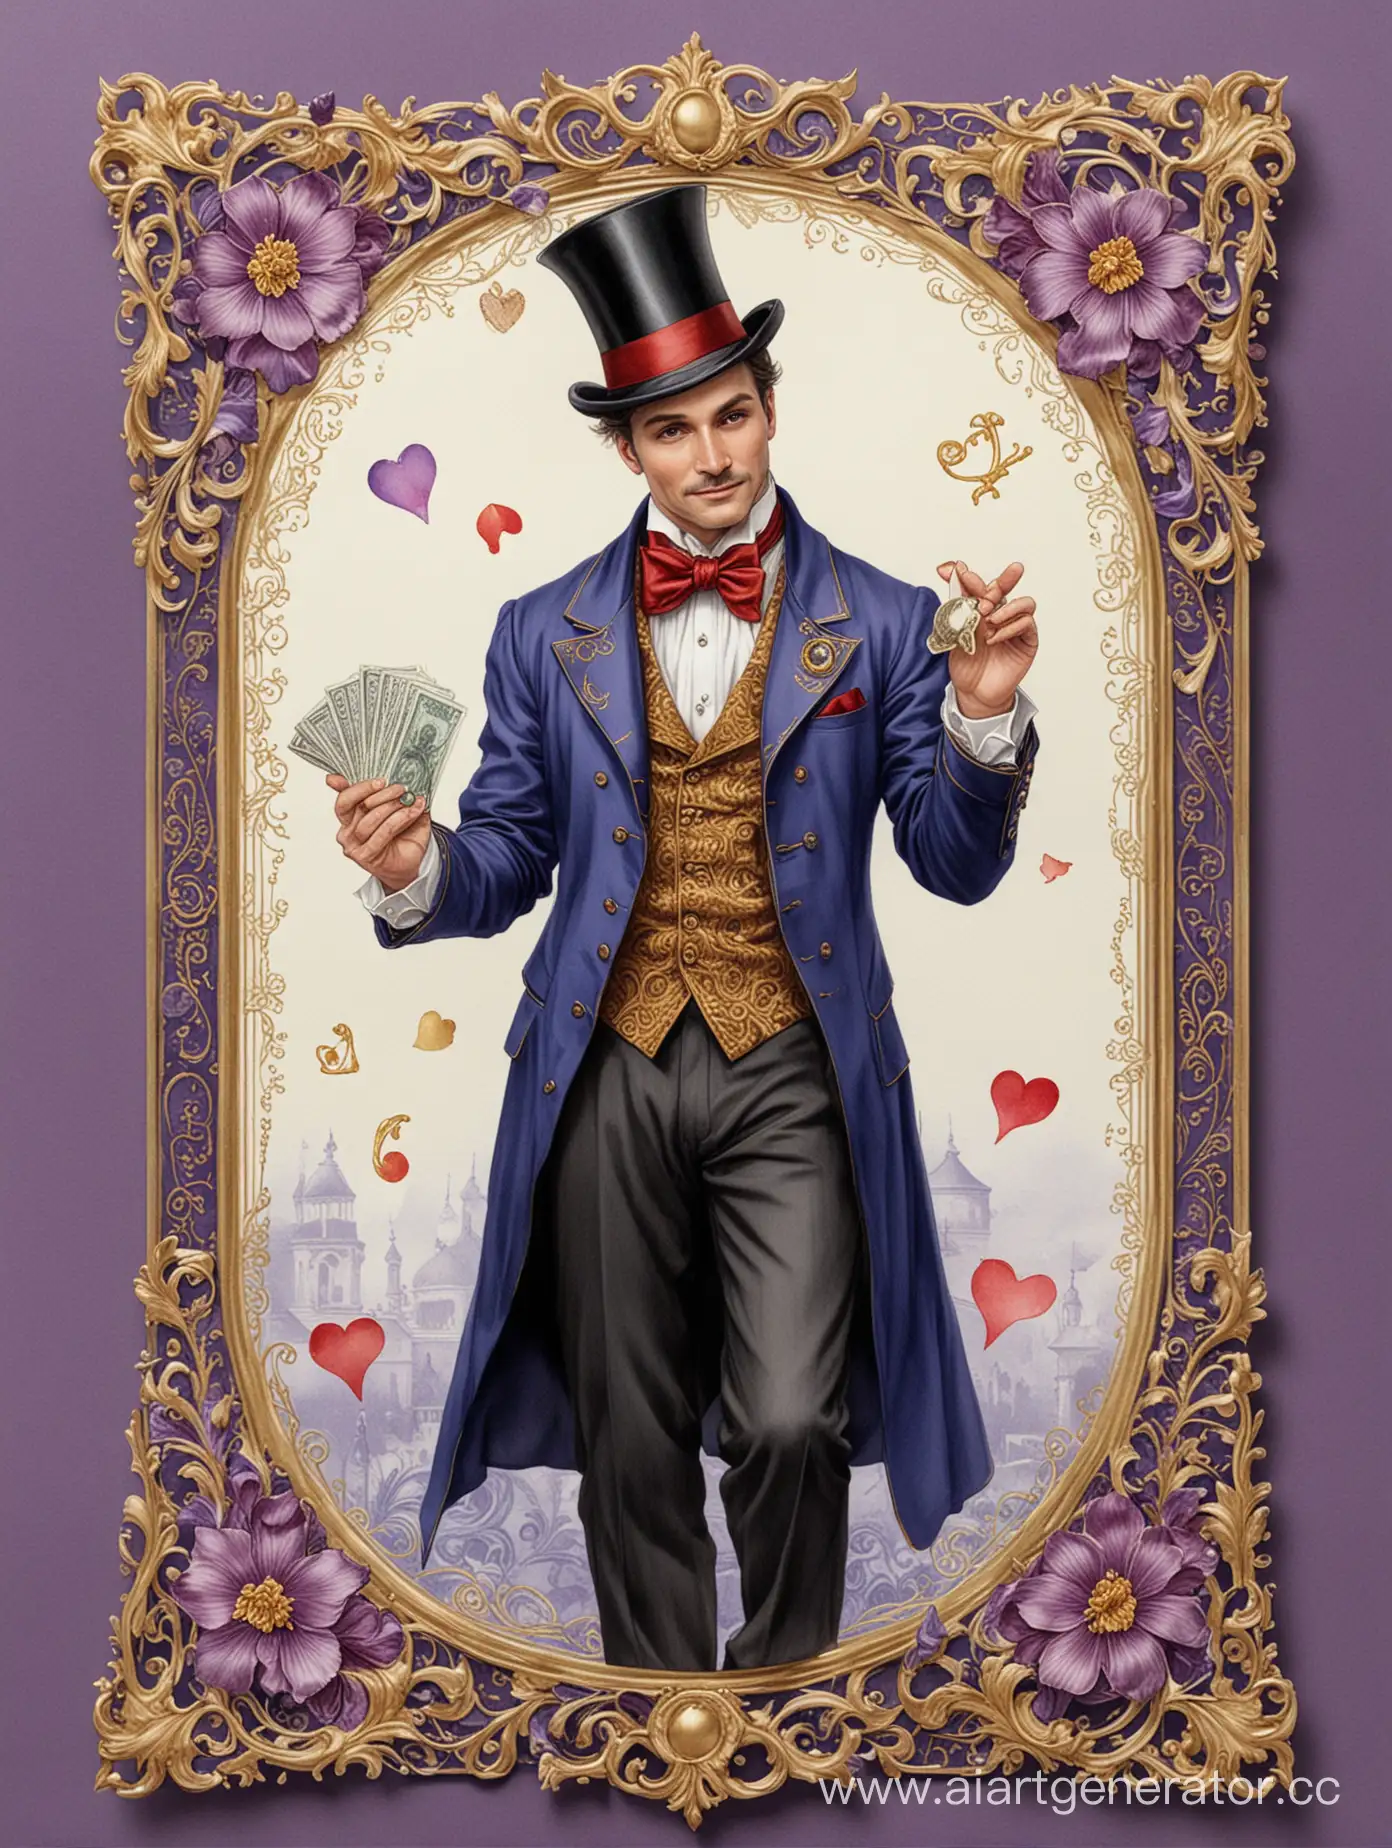 Magician-Performing-Infinite-Magic-with-Hearts-and-Money-on-Tarot-Card